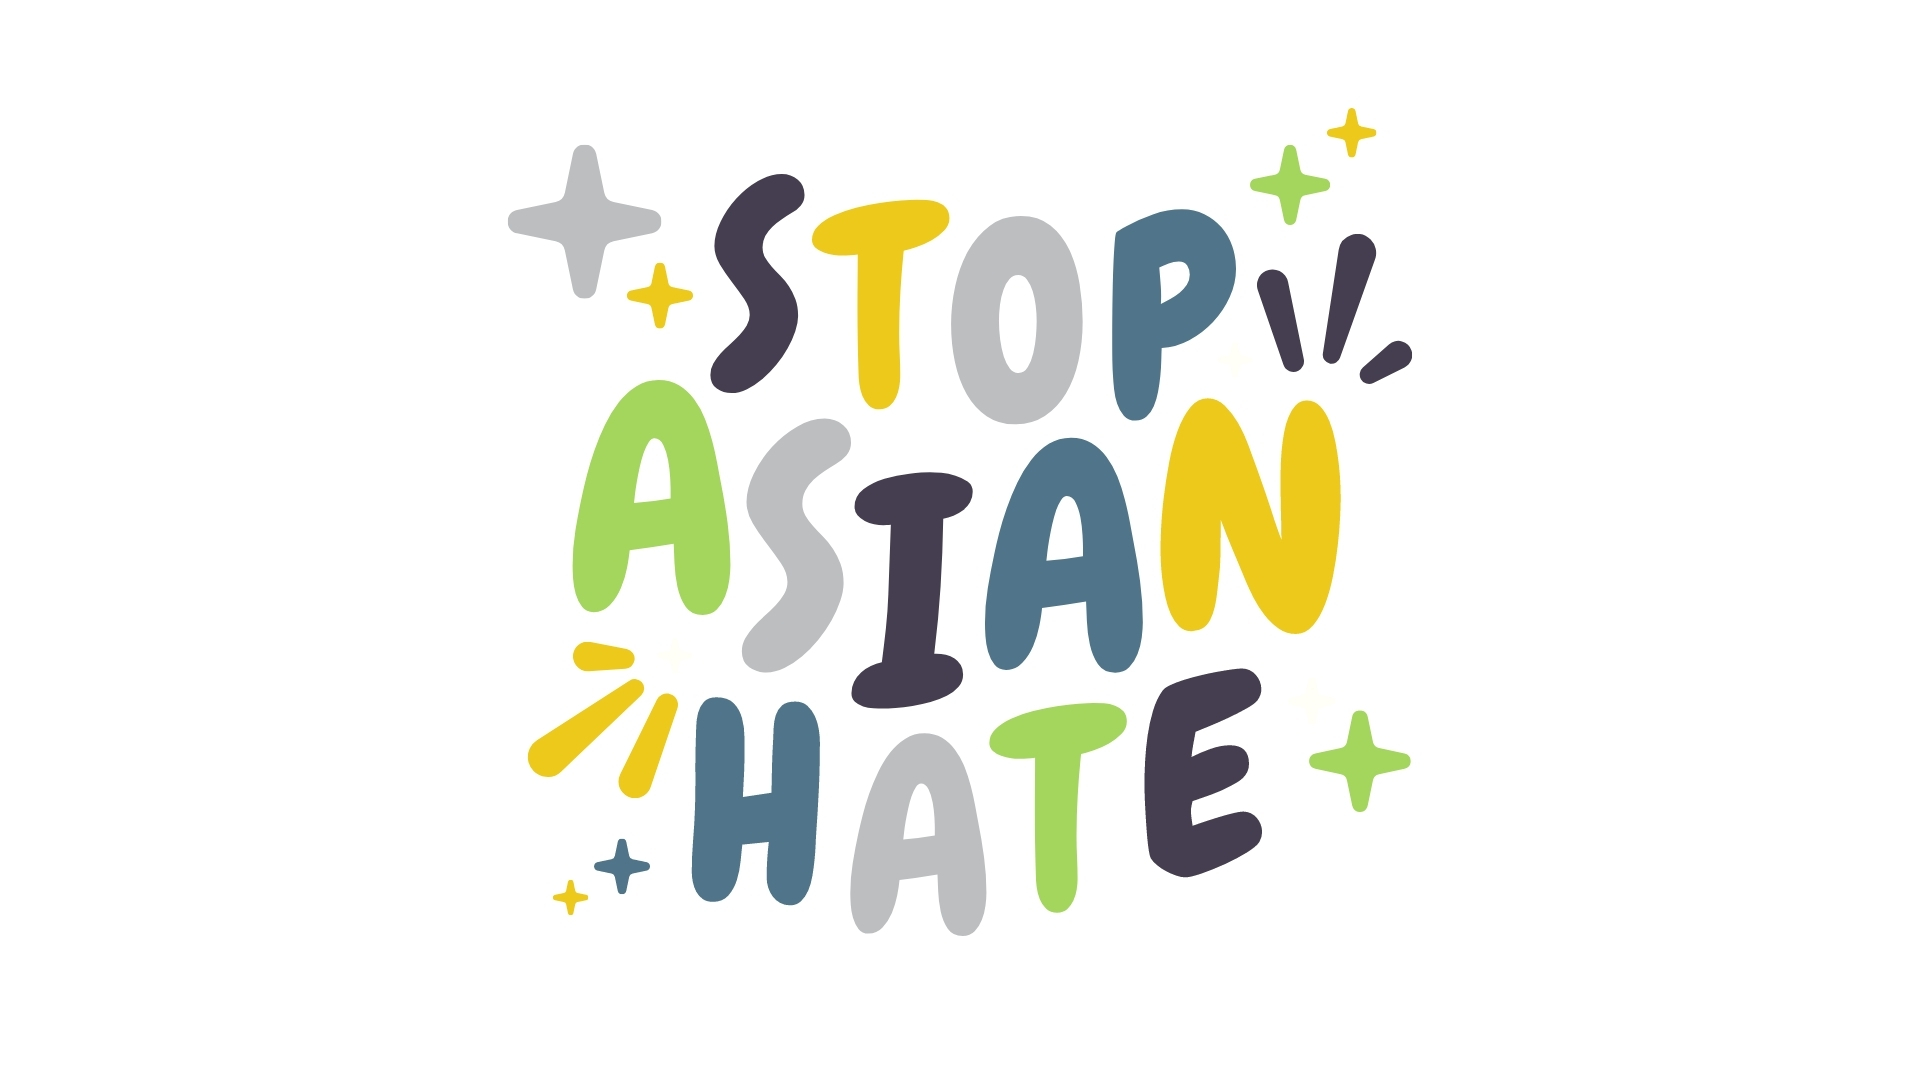 Statement on Asian-American Hate Crimes